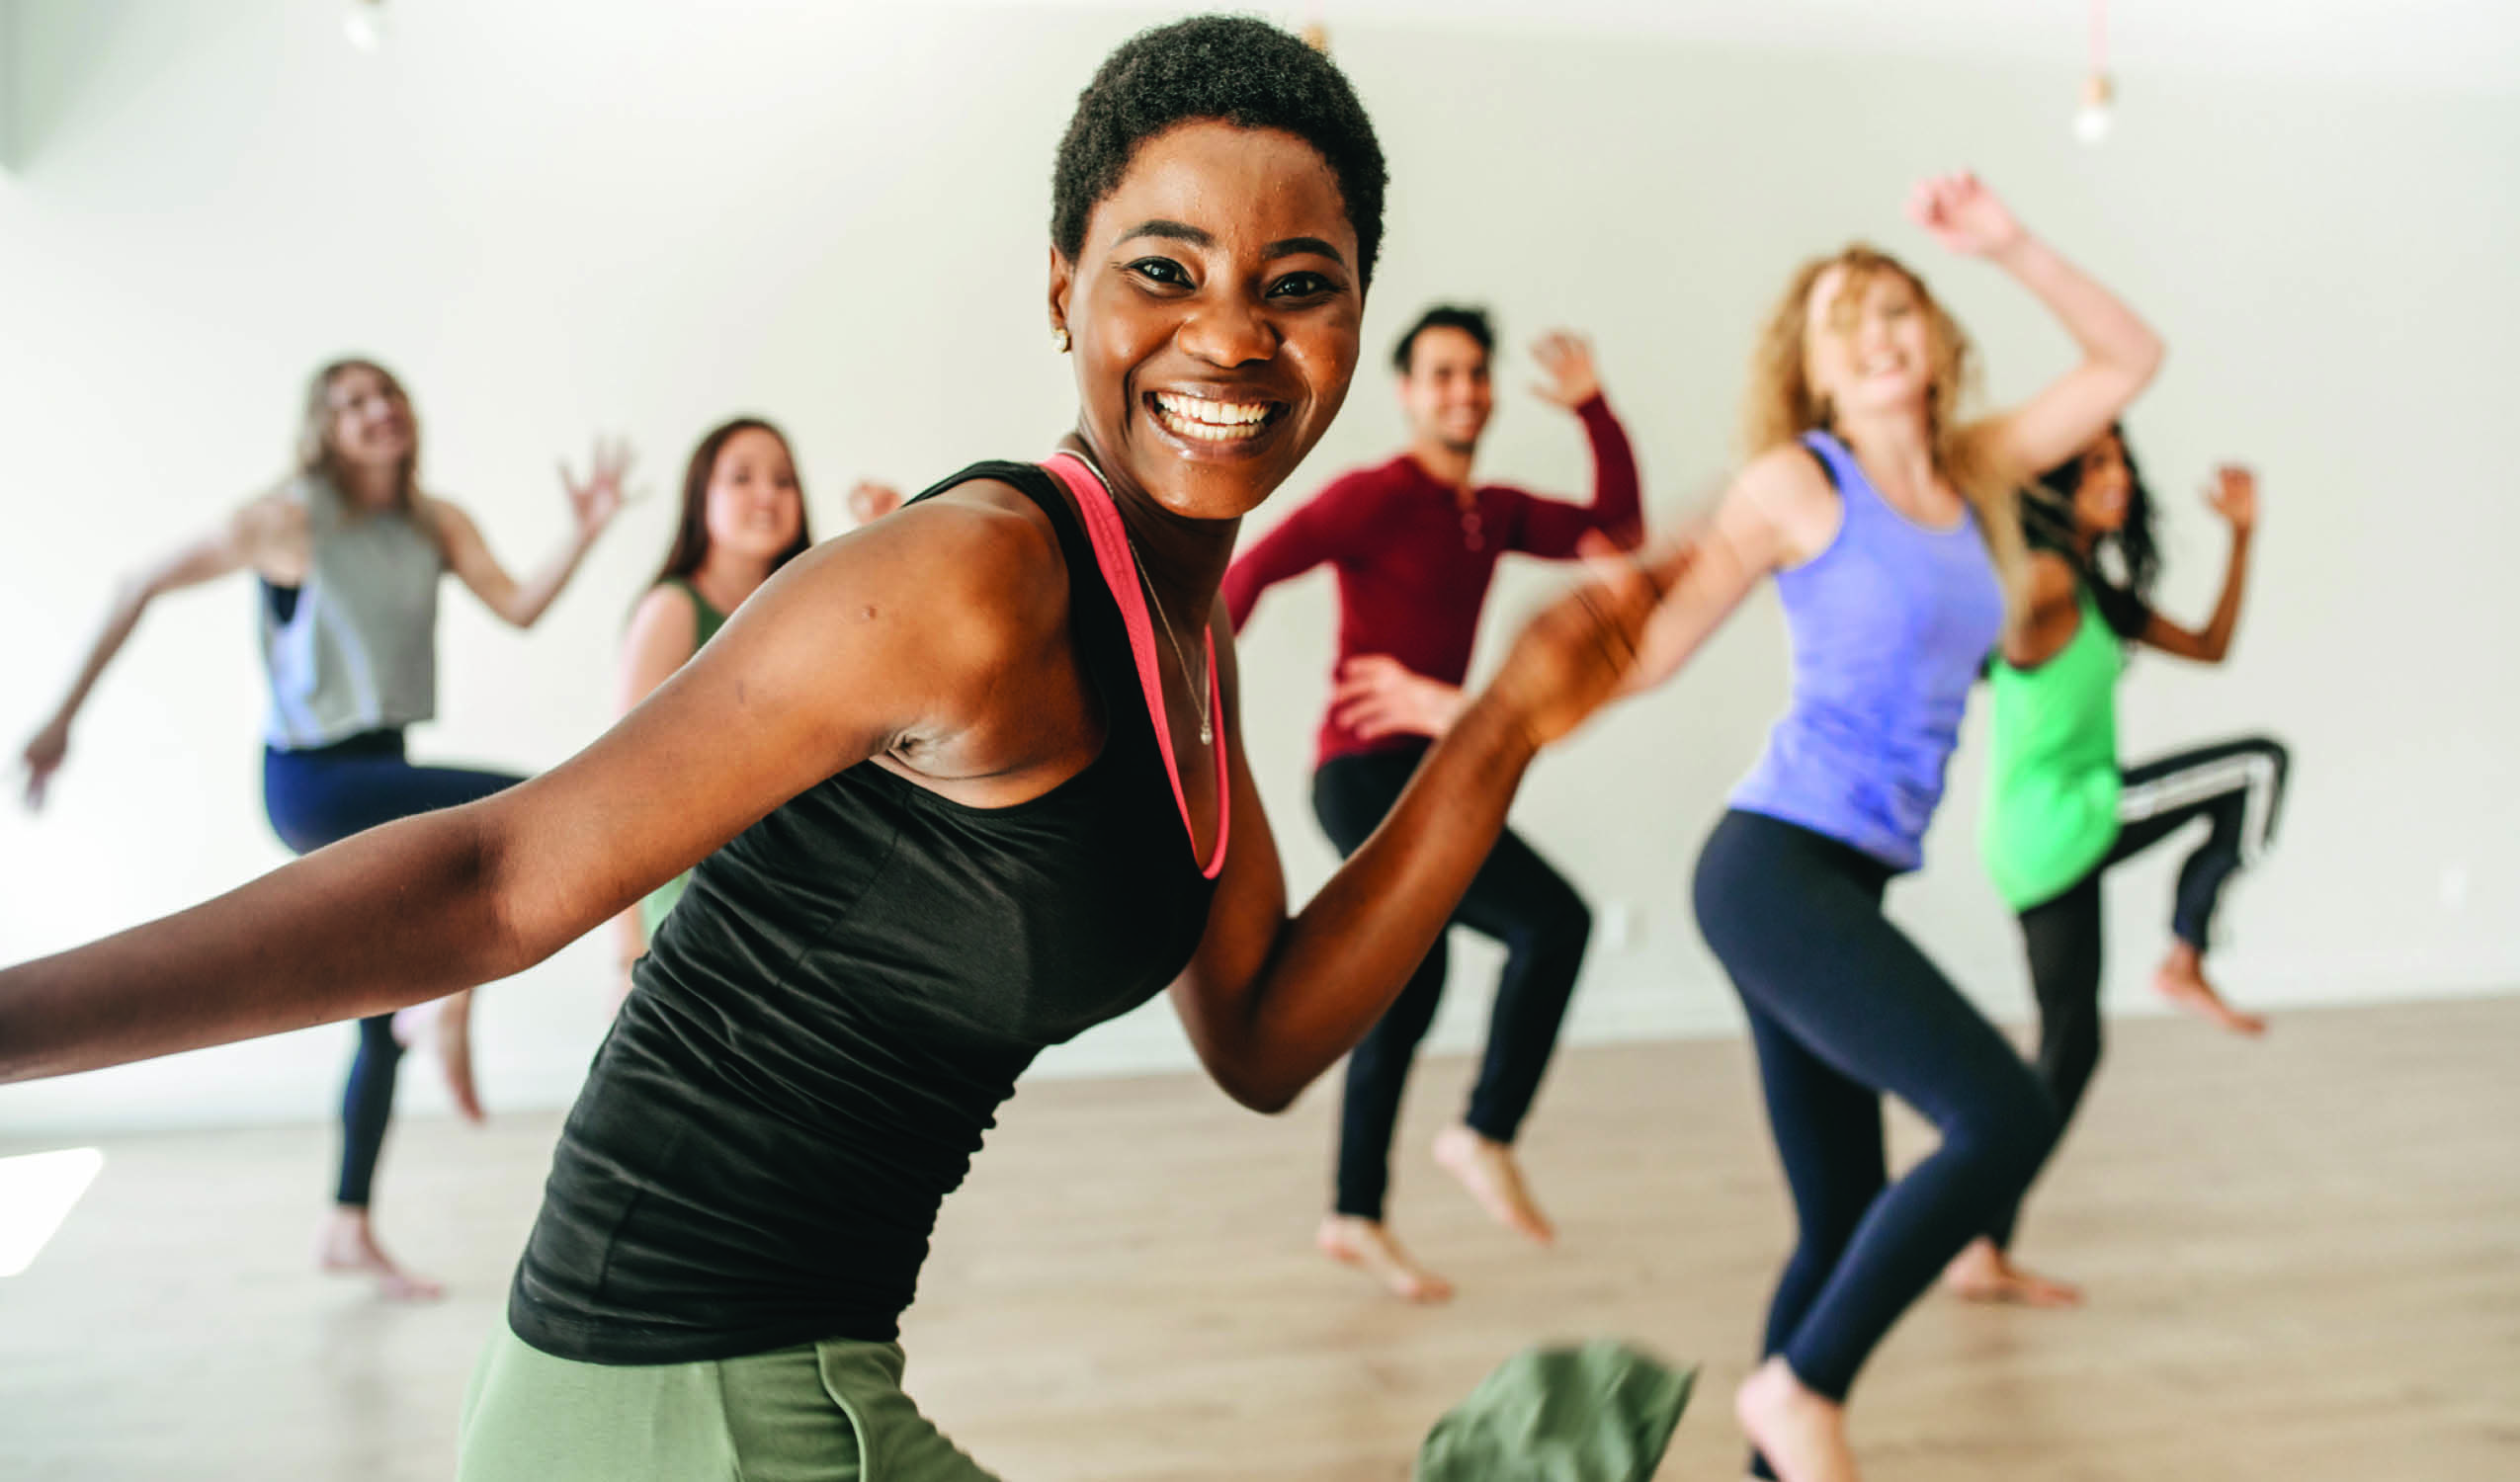 Free Group Exercise Classes